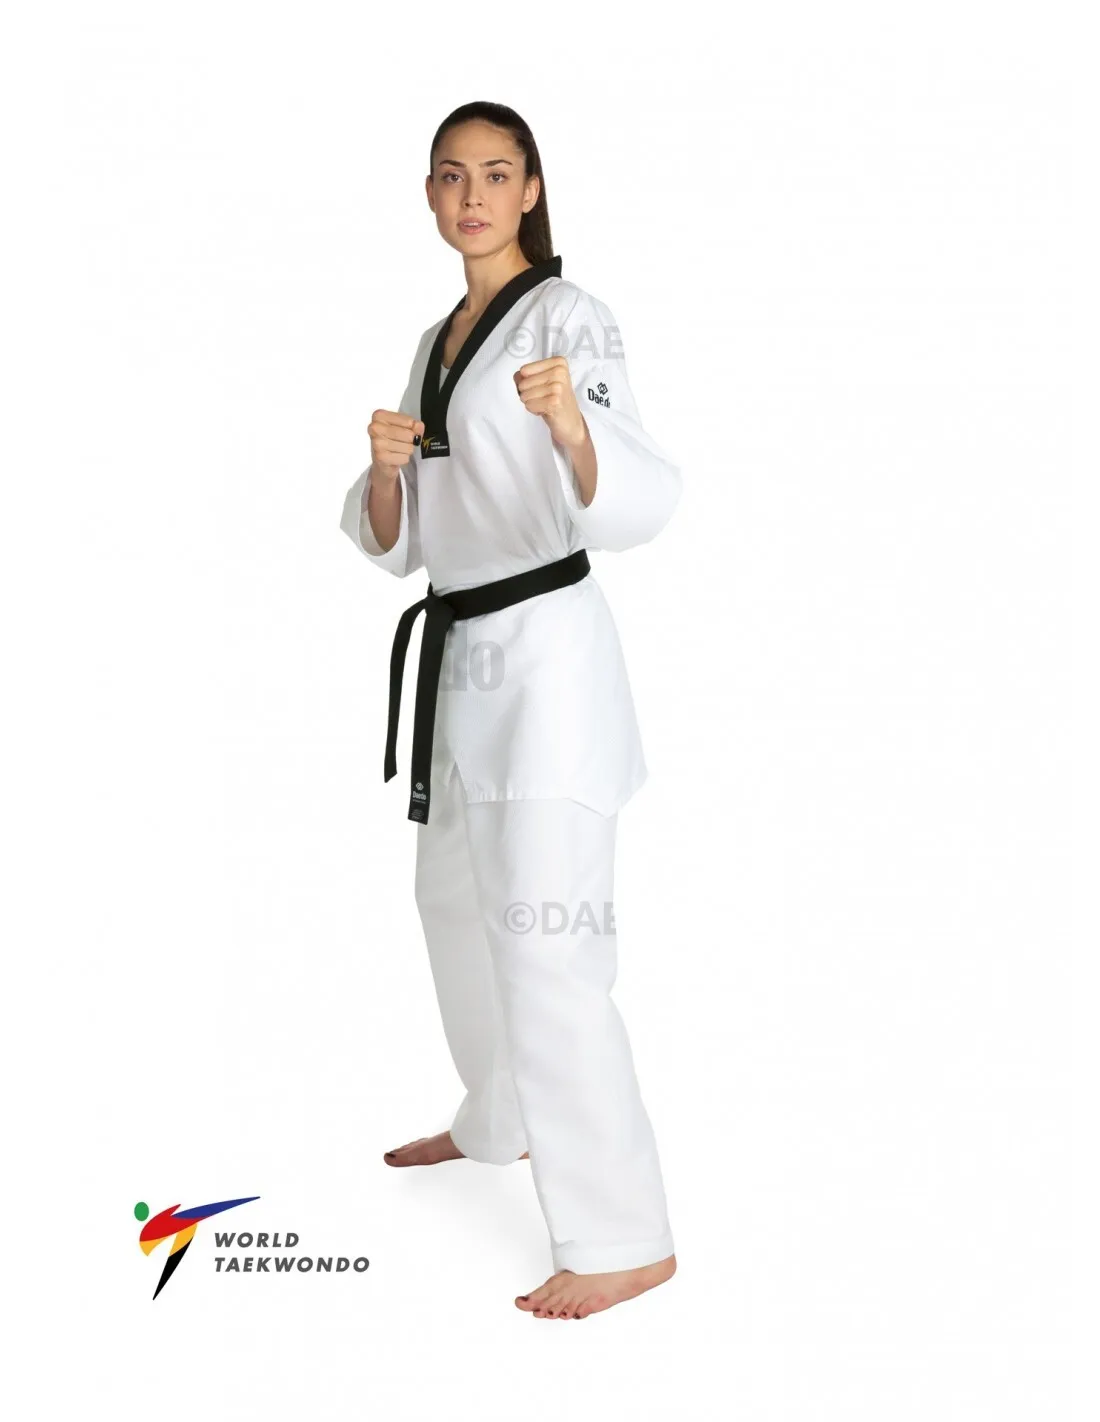 DAEDO - WT APPROVED COMPETITION DOBOK